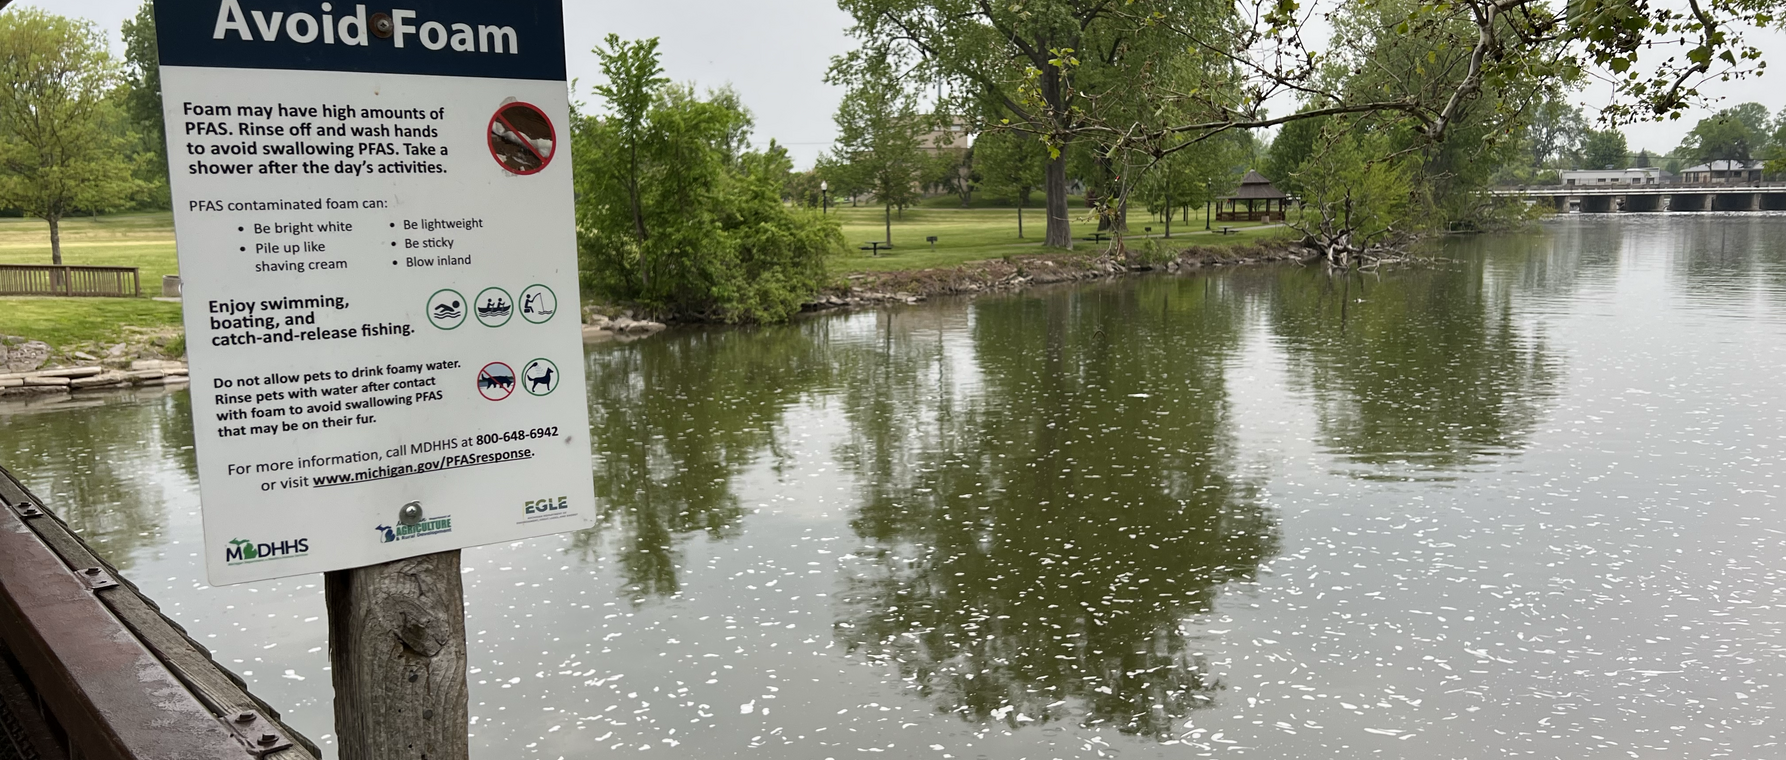 Sign to avoid foam containing PFAS on Huron River